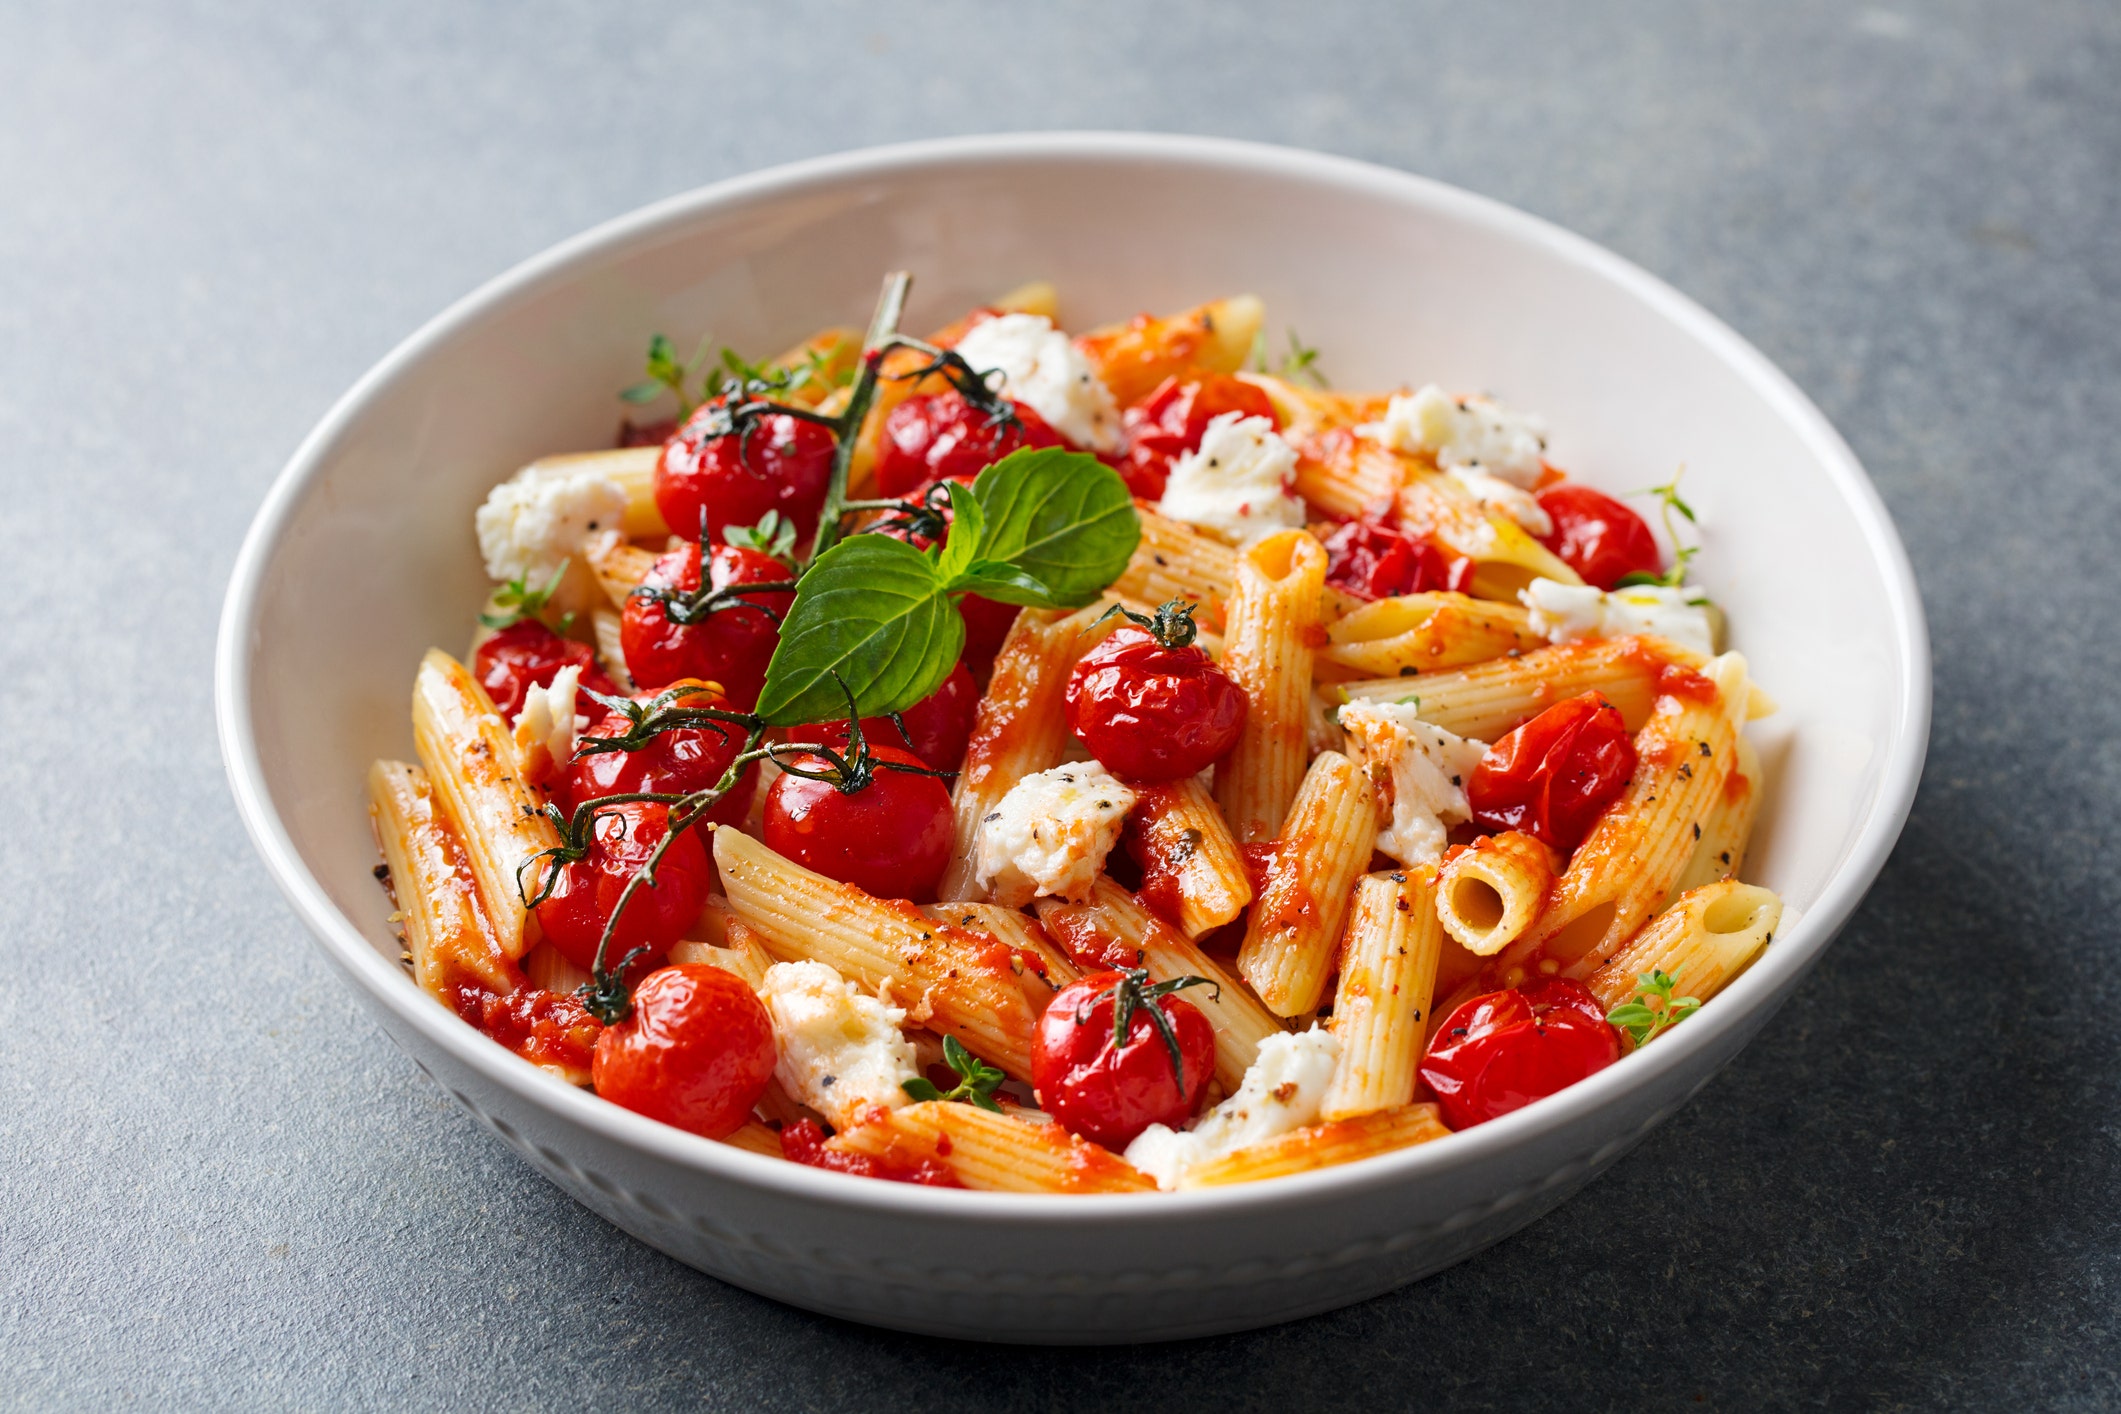 Why TikTok users are going crazy for baked feta pasta